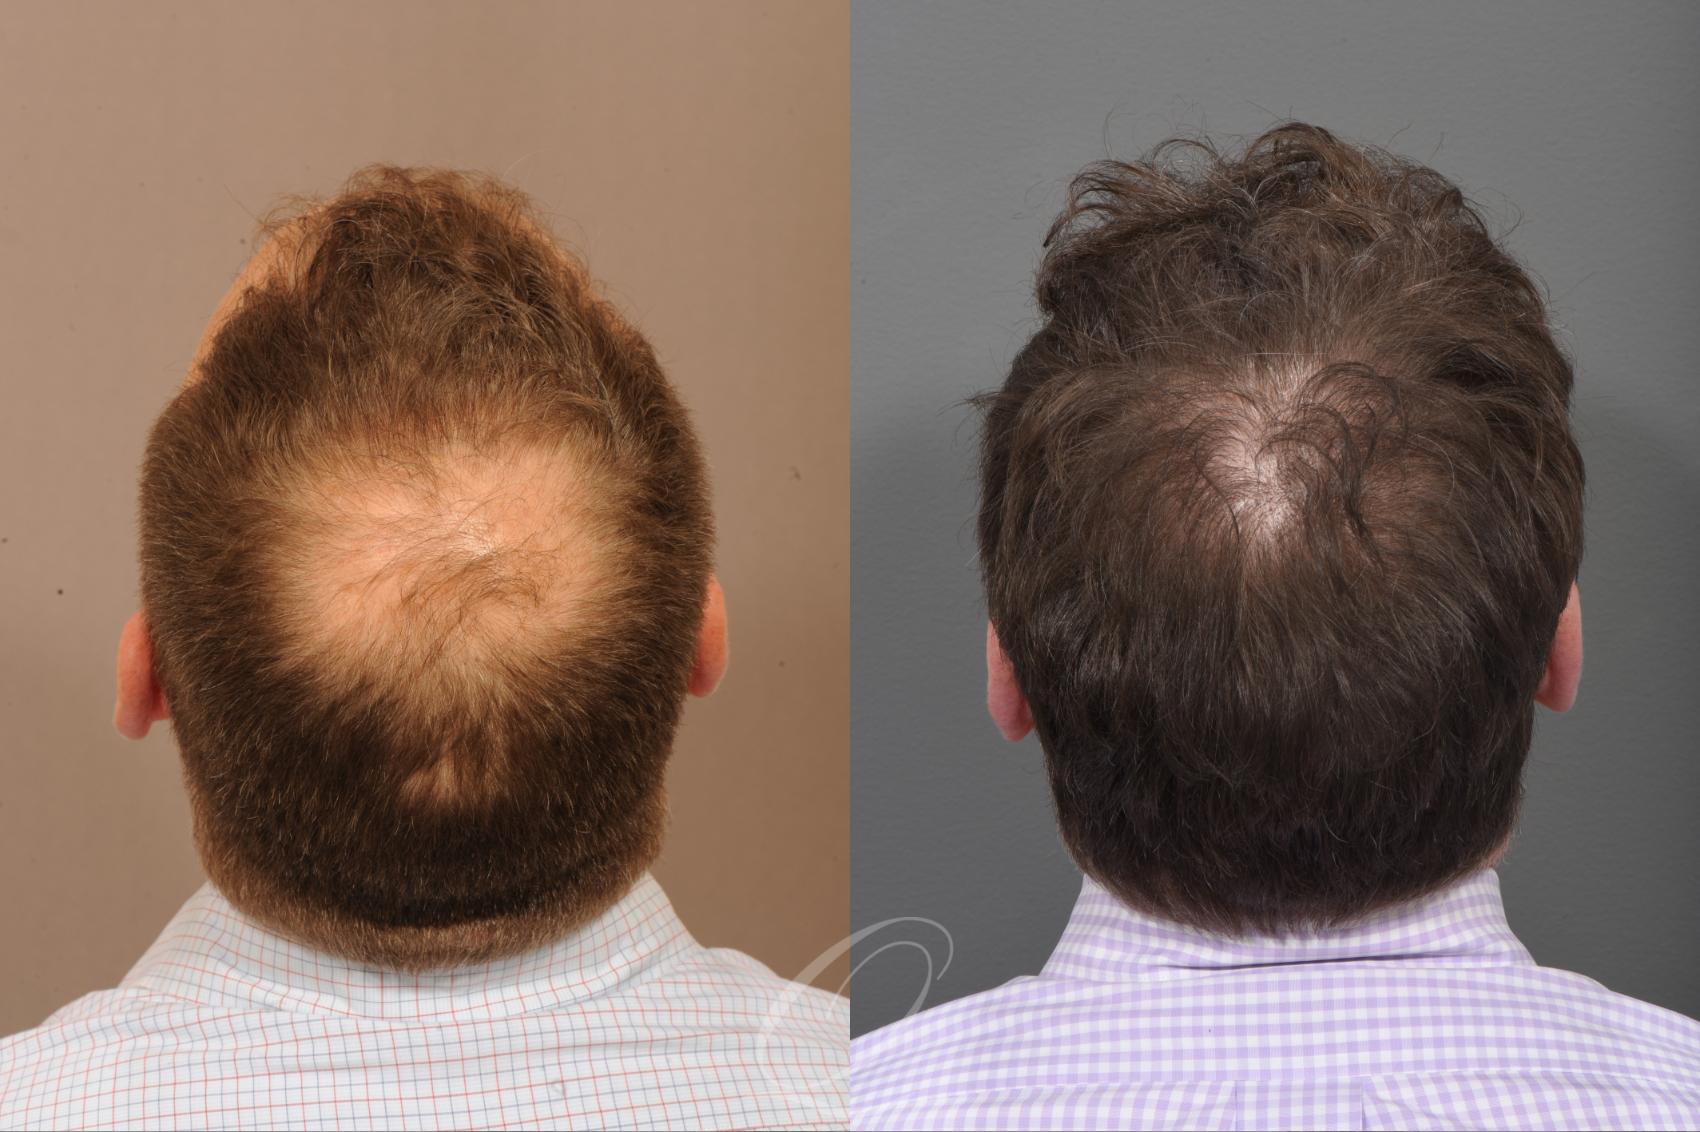 Outstanding RESULTS!!!... - New Roots Hair Transplant Center | Facebook